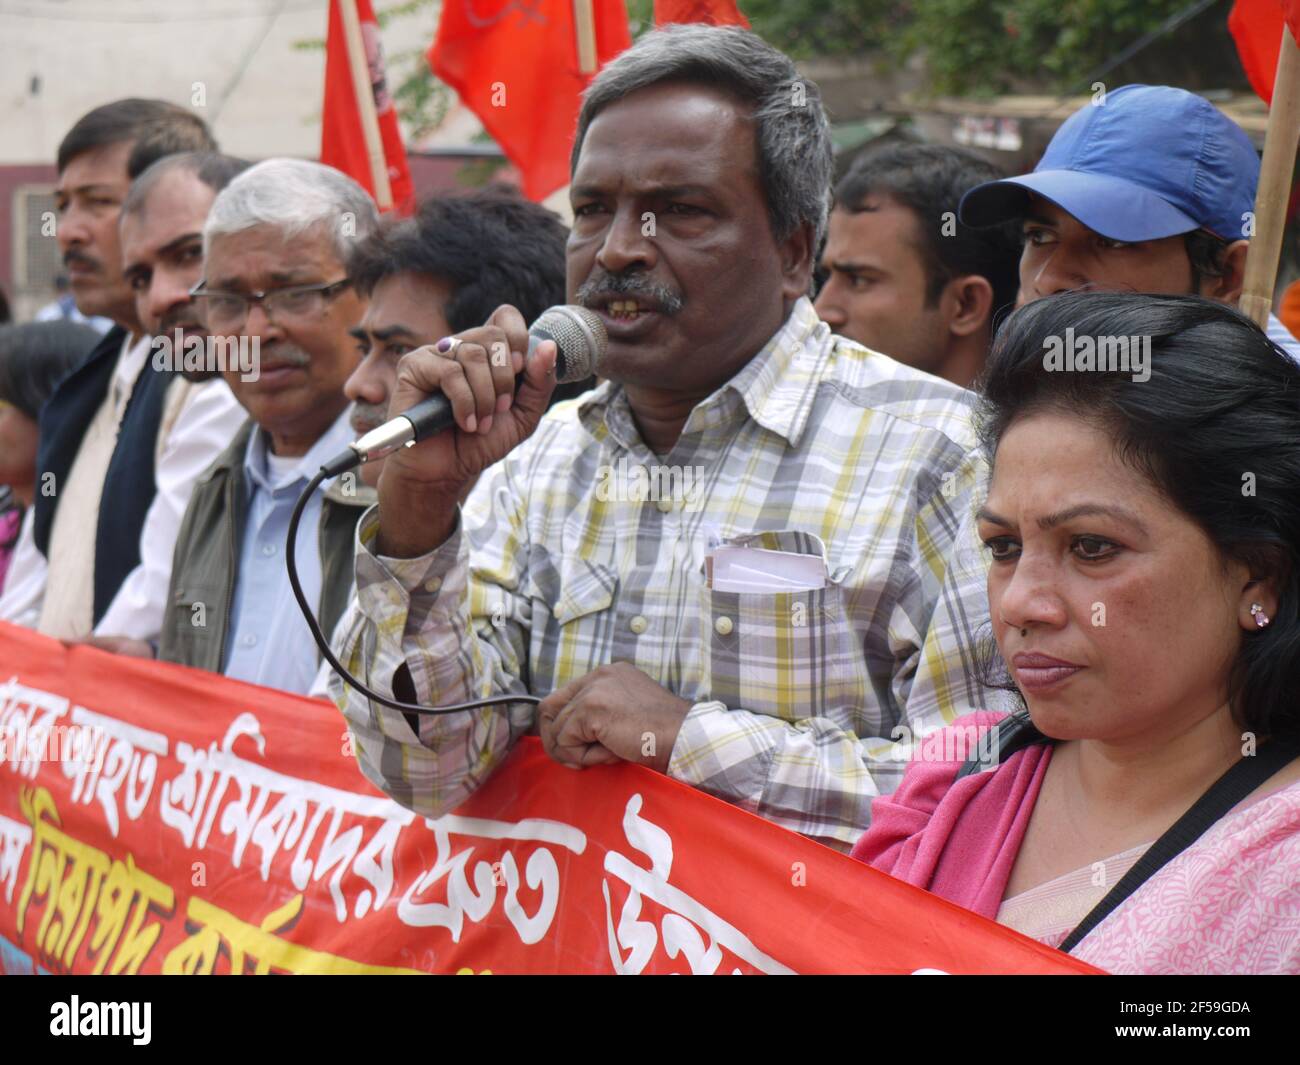 Amirul Haque Amin speaking during protest for safety in factories in Bangladesh Stock Photo